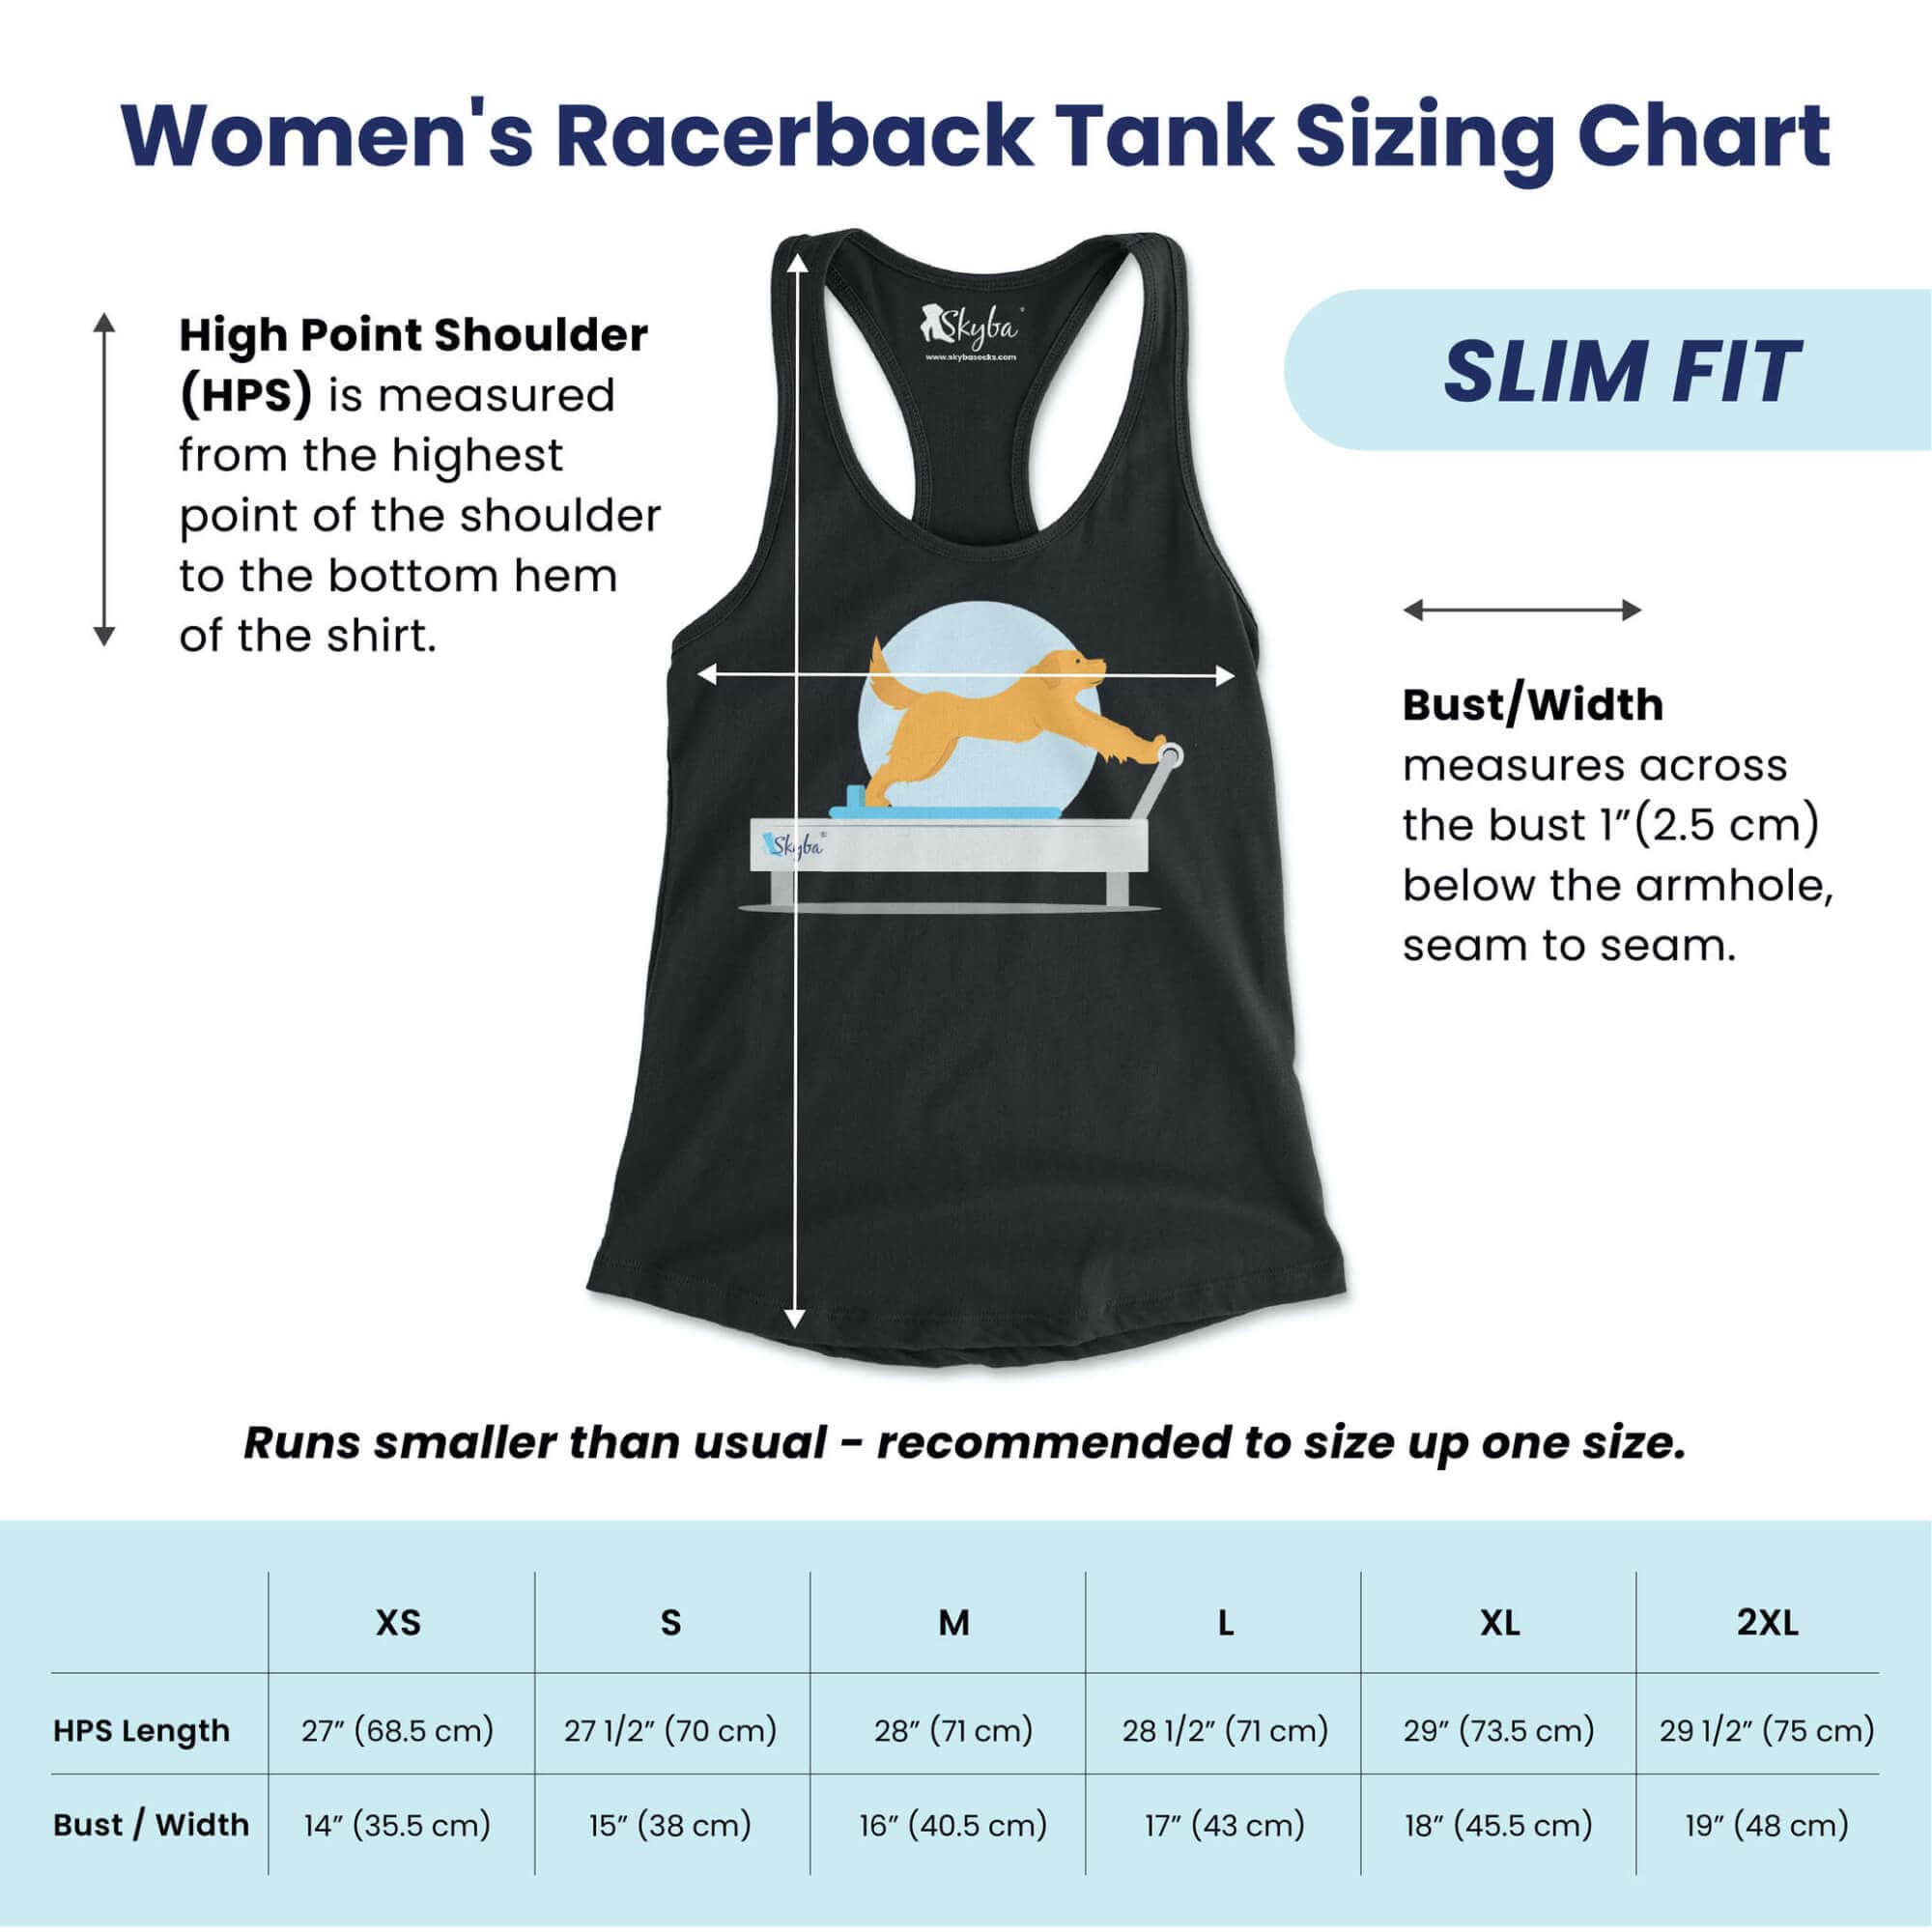 "Puppies and Pilates" Golden Retriever on Reformer - Women's Slim Fit Tank Skyba Tank Top